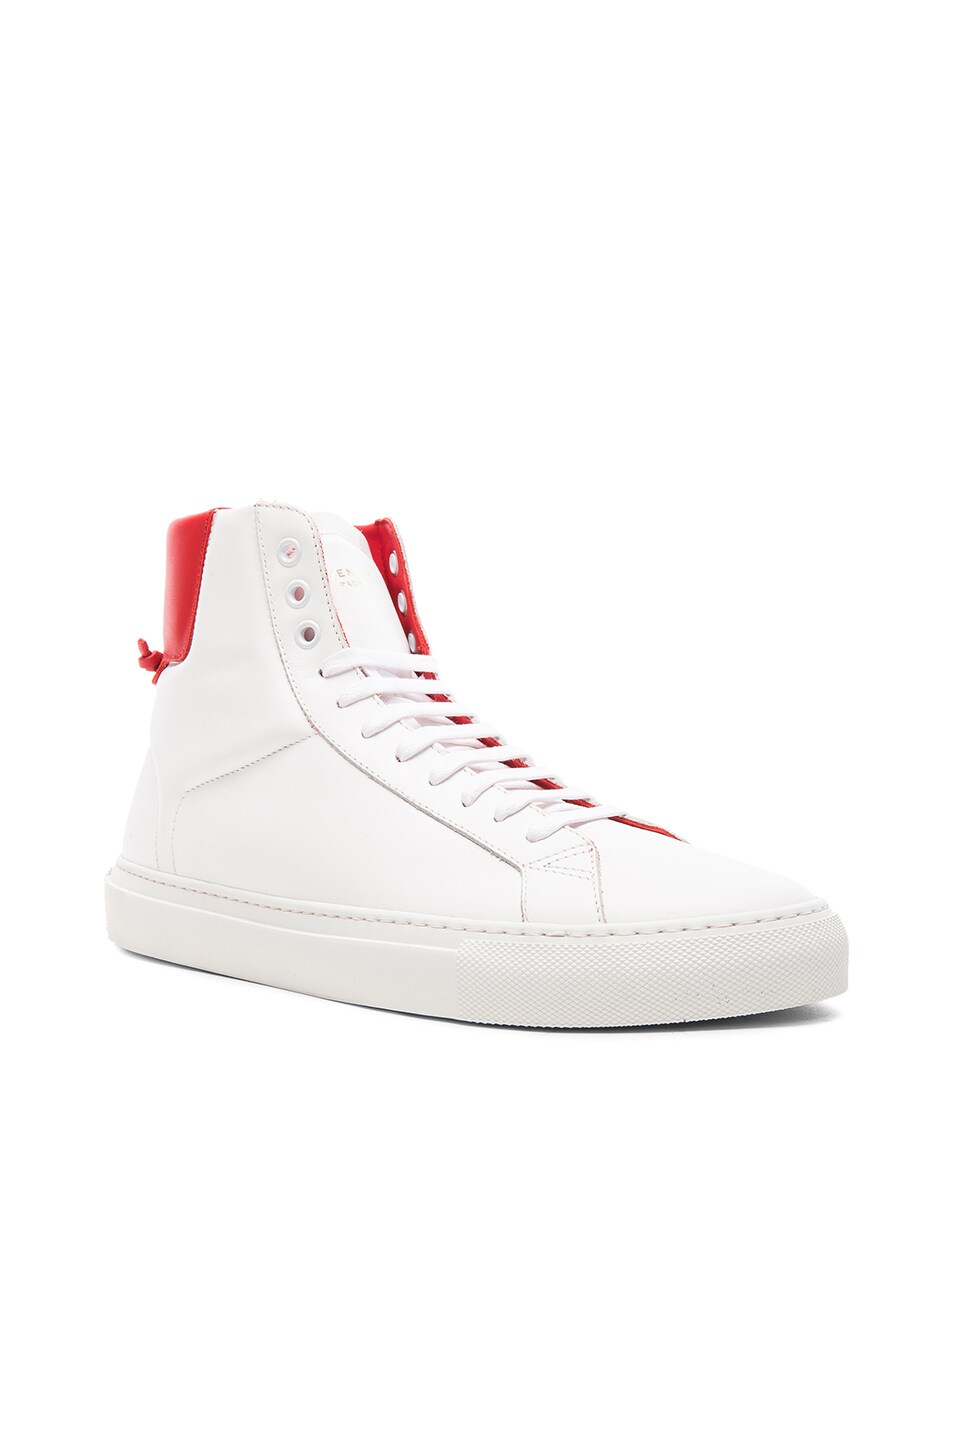 Image 1 of Givenchy Knots High Sneaker in Red & White